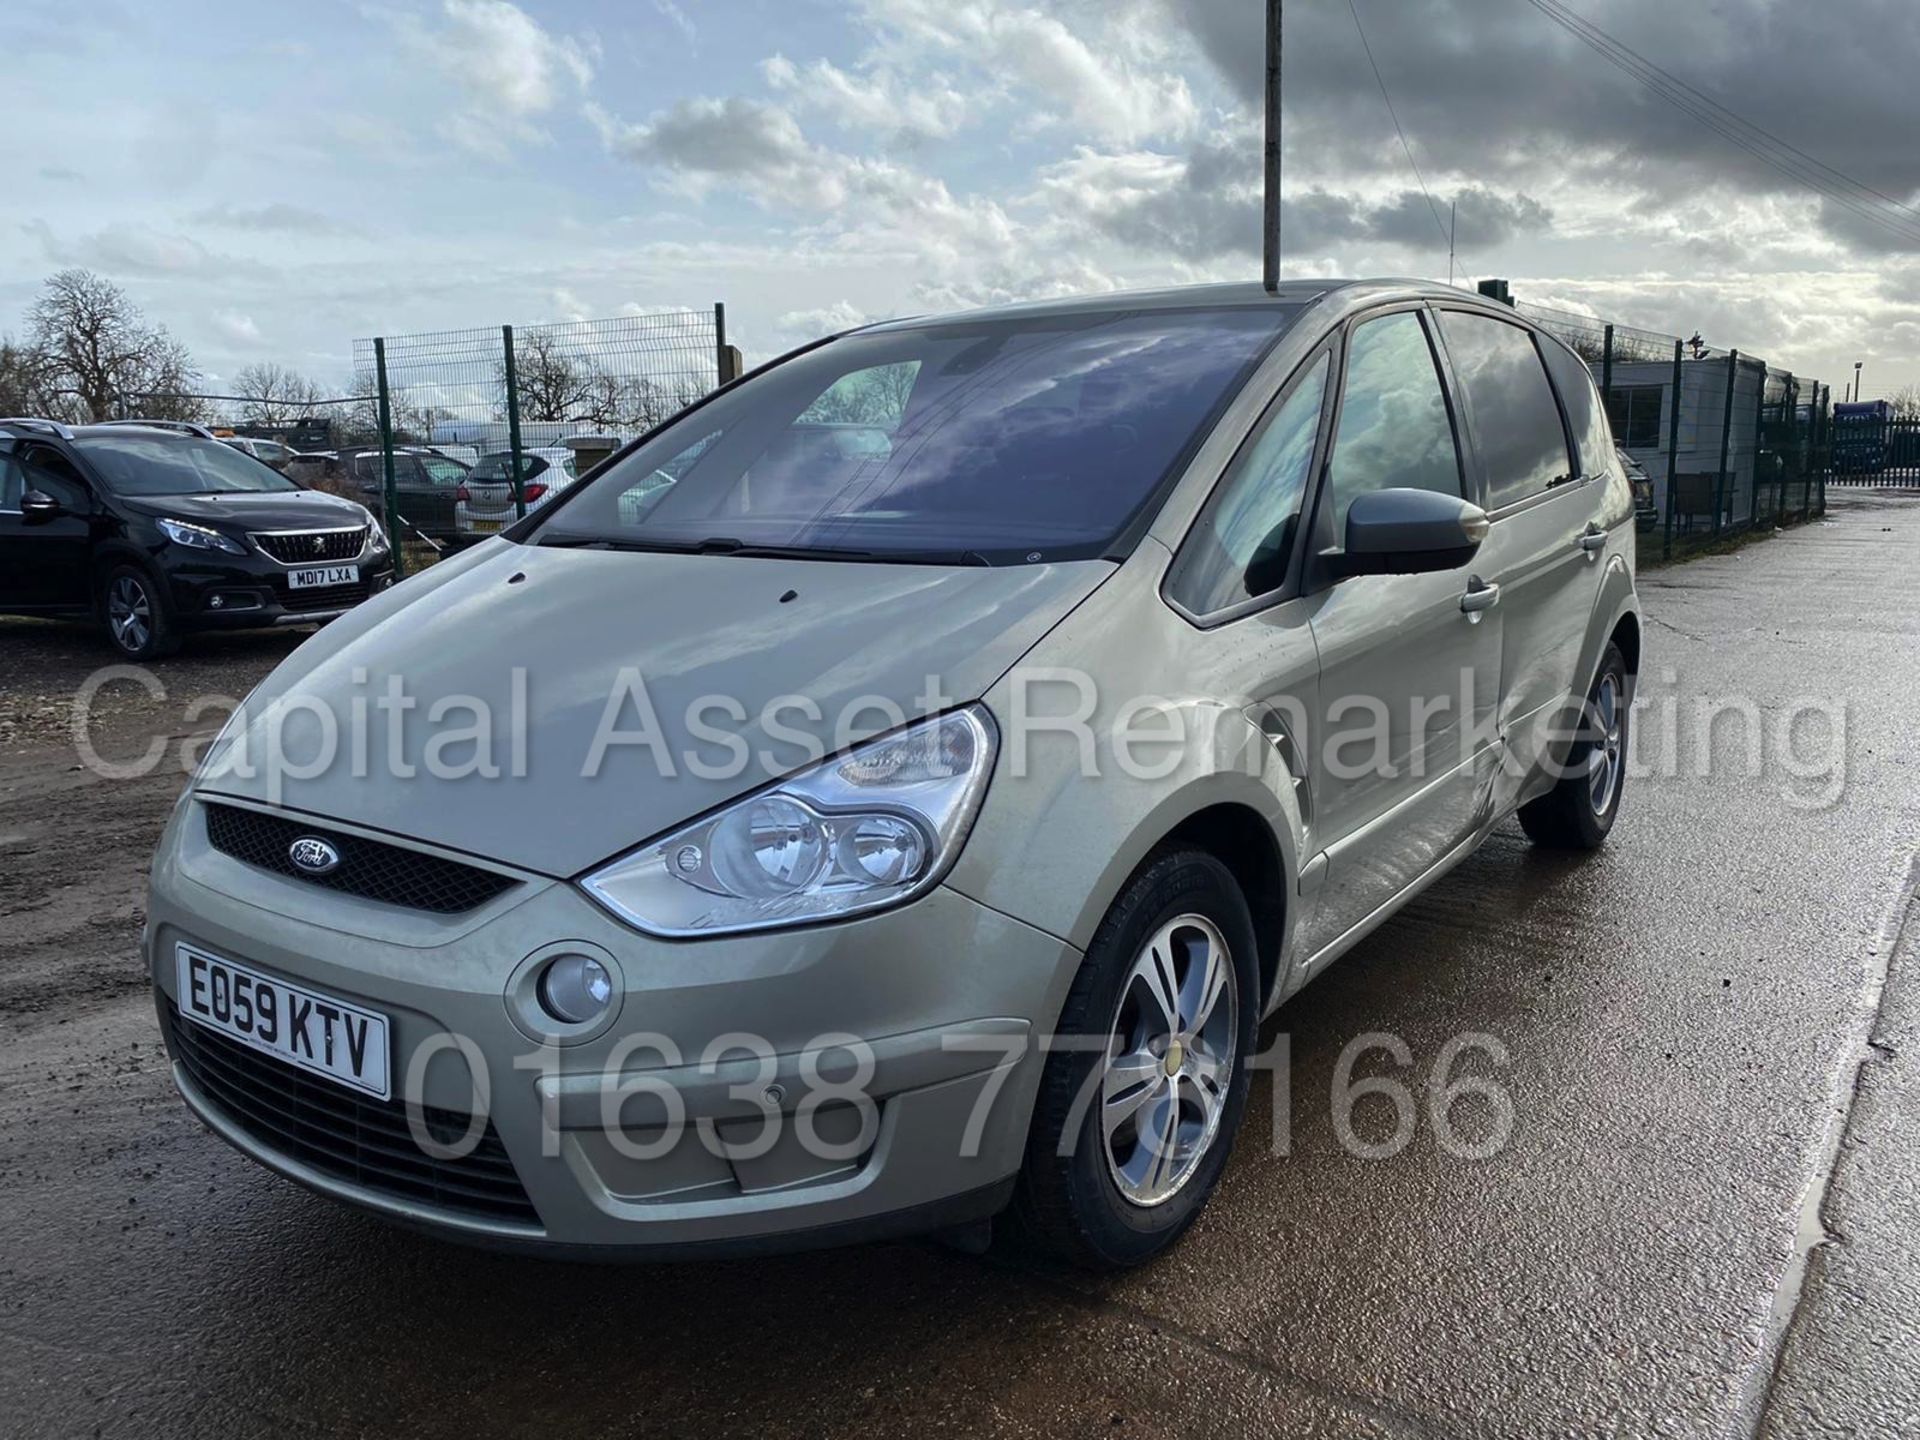 (On Sale) FORD S-MAX *ZETEC EDITION* 7 SEATER MPV (2010 MODEL) '1.8 TDCI - 6 SPEED' *A/C* (NO VAT) - Image 3 of 16